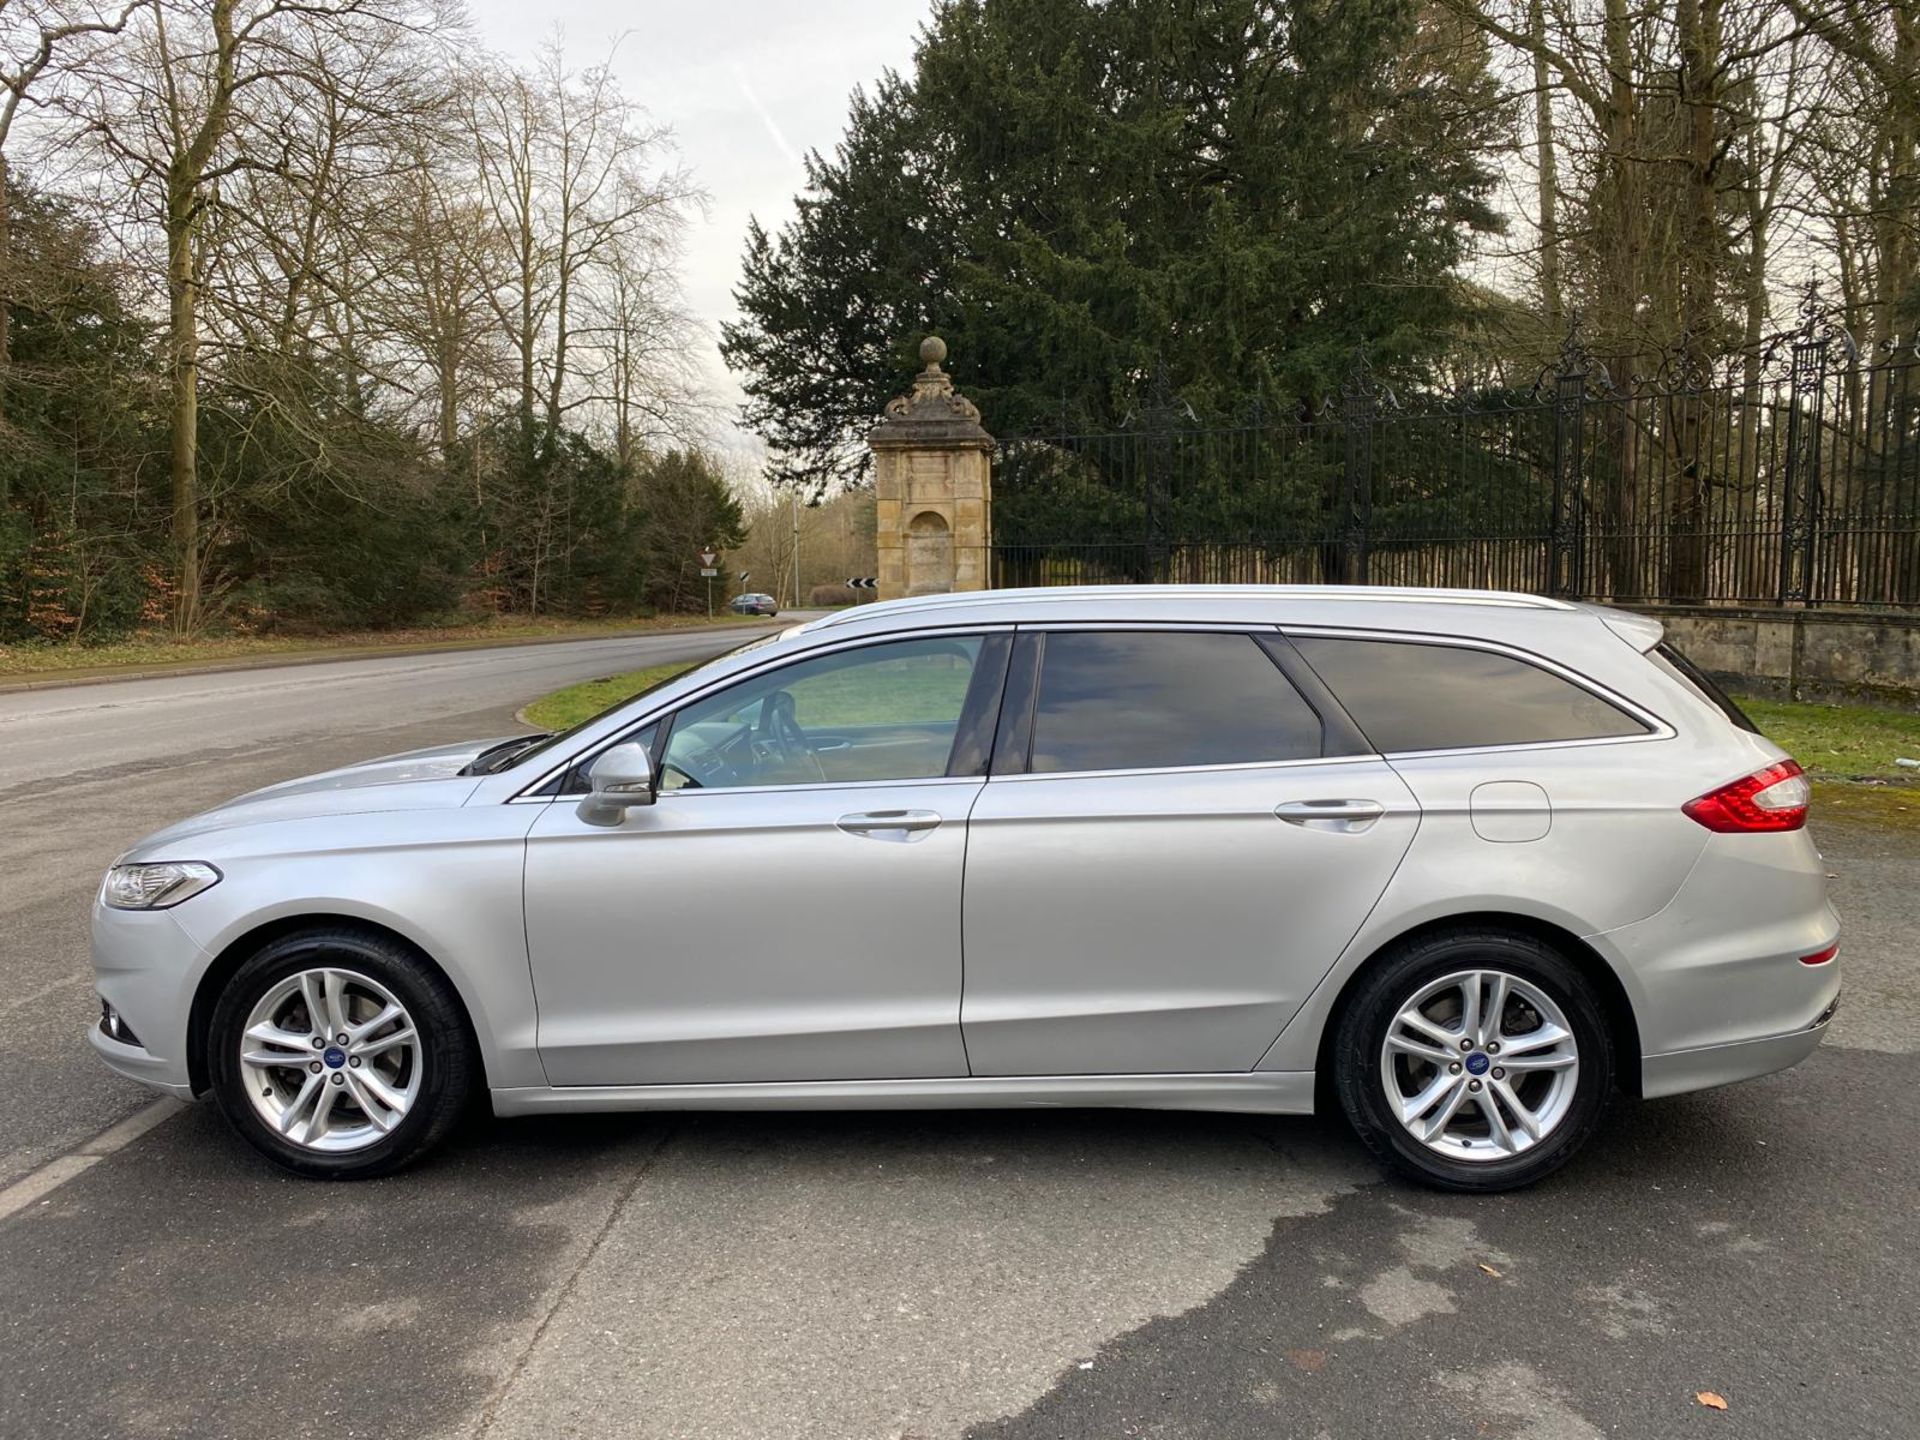 2015 FORD MONDEO TITANIUM ( X PACK ) ESTATE - 155K MILES - 2 KEYS - FSH & RECEIPTS FOR WORK PRESENT  - Image 2 of 19